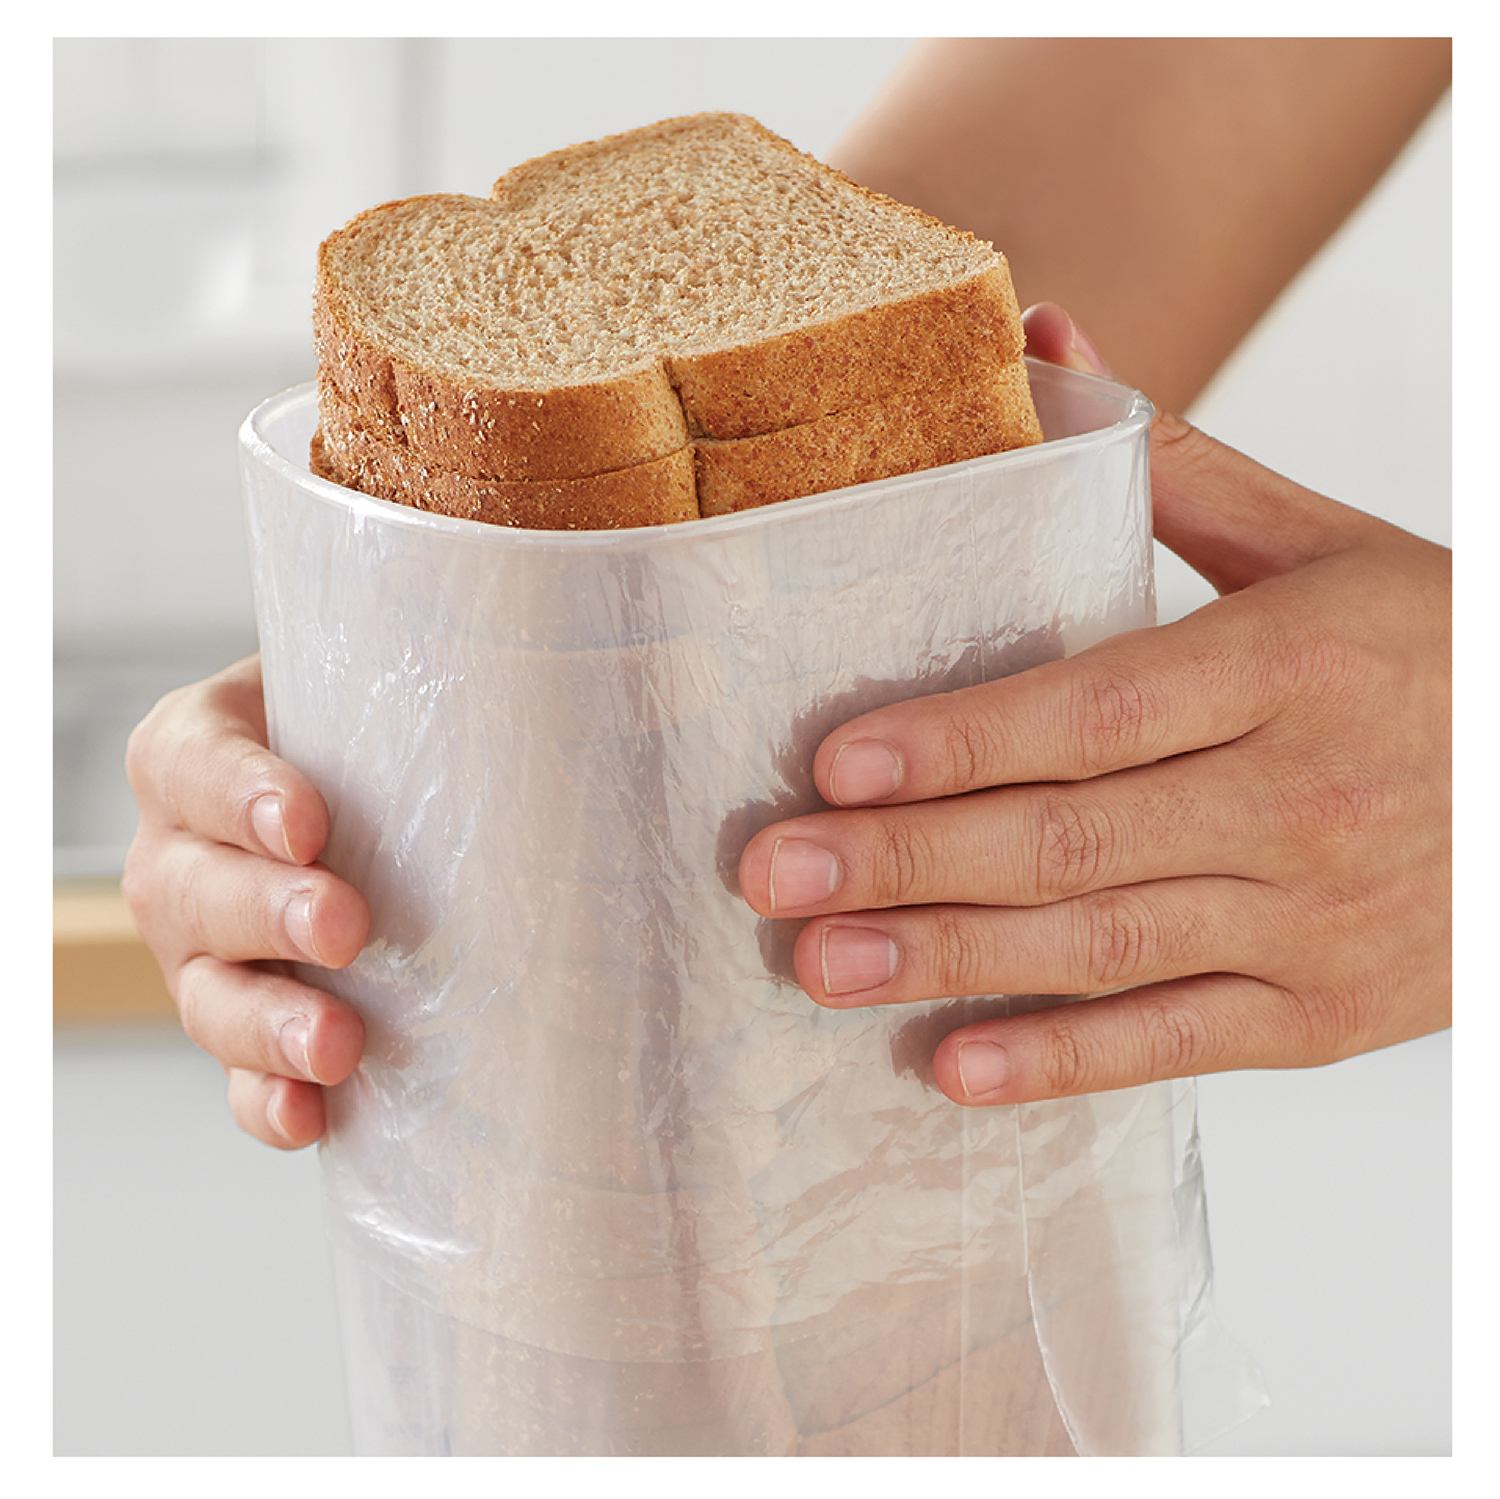 Mainstays Bread Plastic Storage Keeper, Clear with Gray Lid (1 Each) 5.25" x 5.25" x 13.62" - image 5 of 6